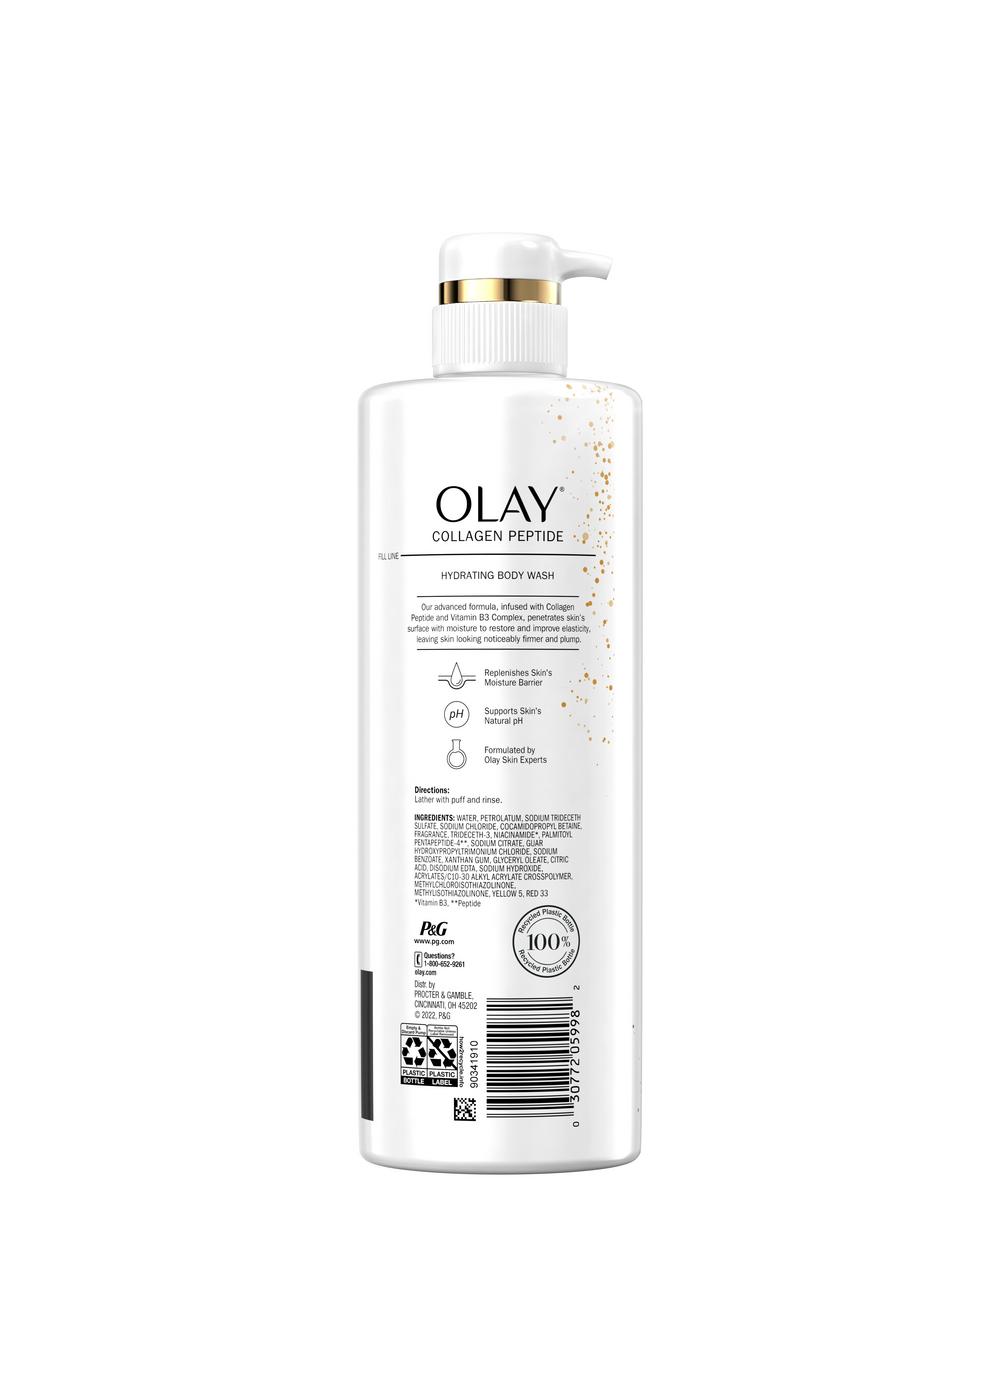 Olay Collagen Peptide Hydrating Body Wash; image 2 of 2